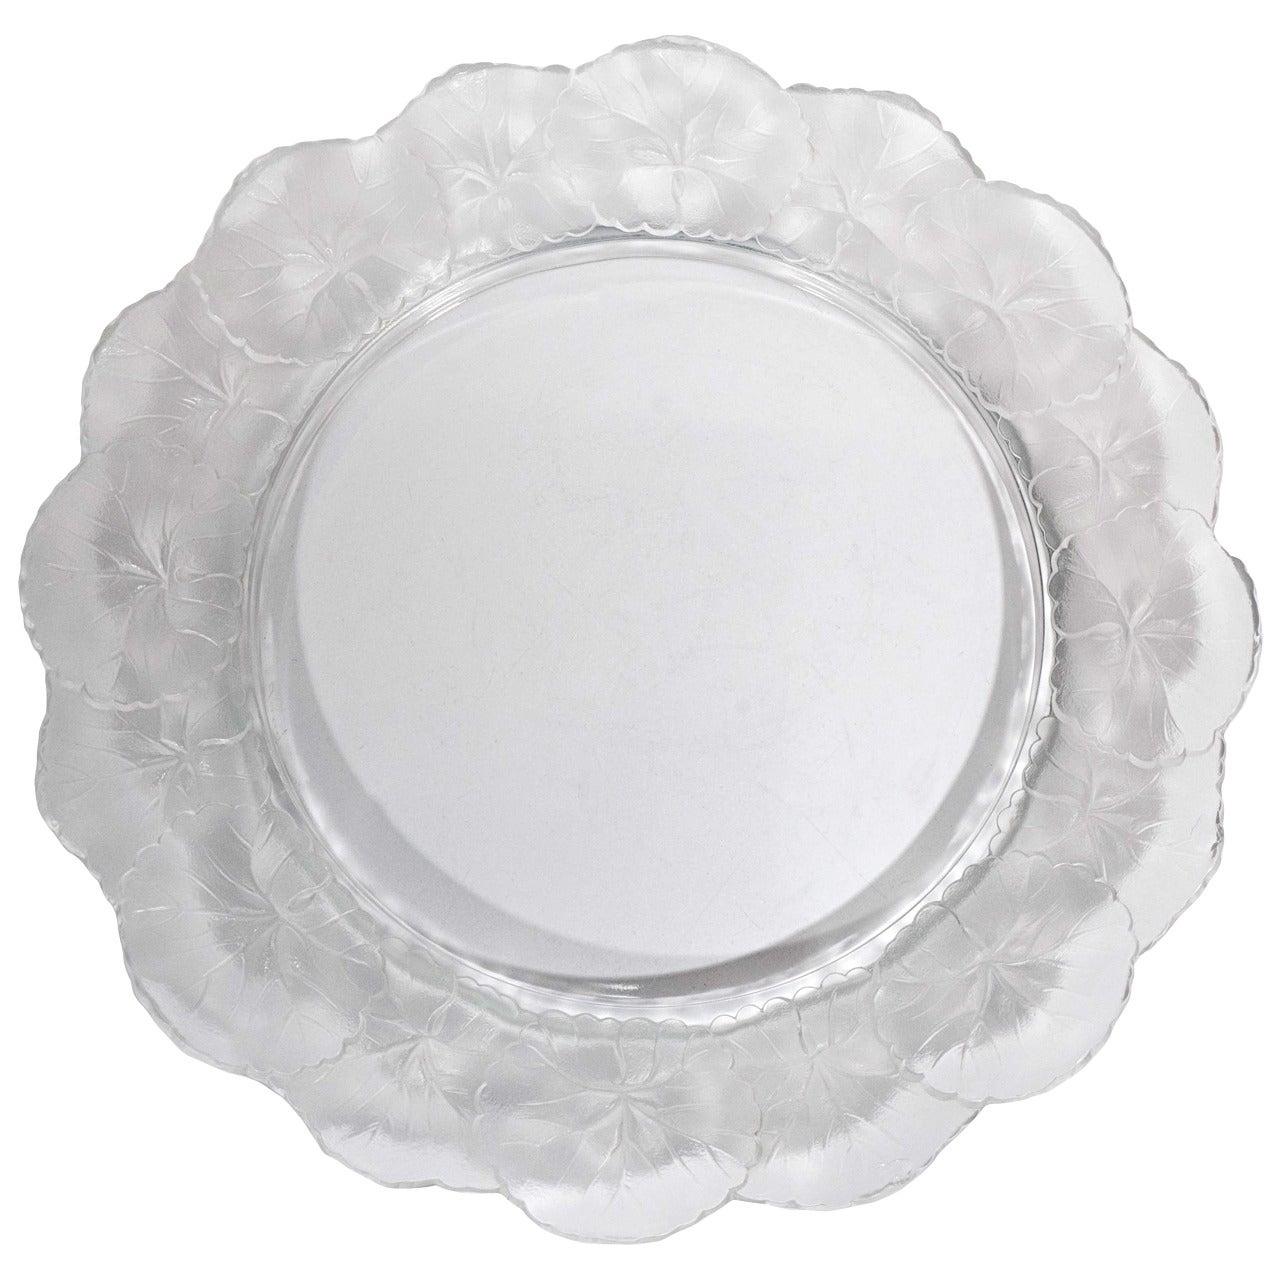 Lalique French Crystal Honfleur Bowl and Dish